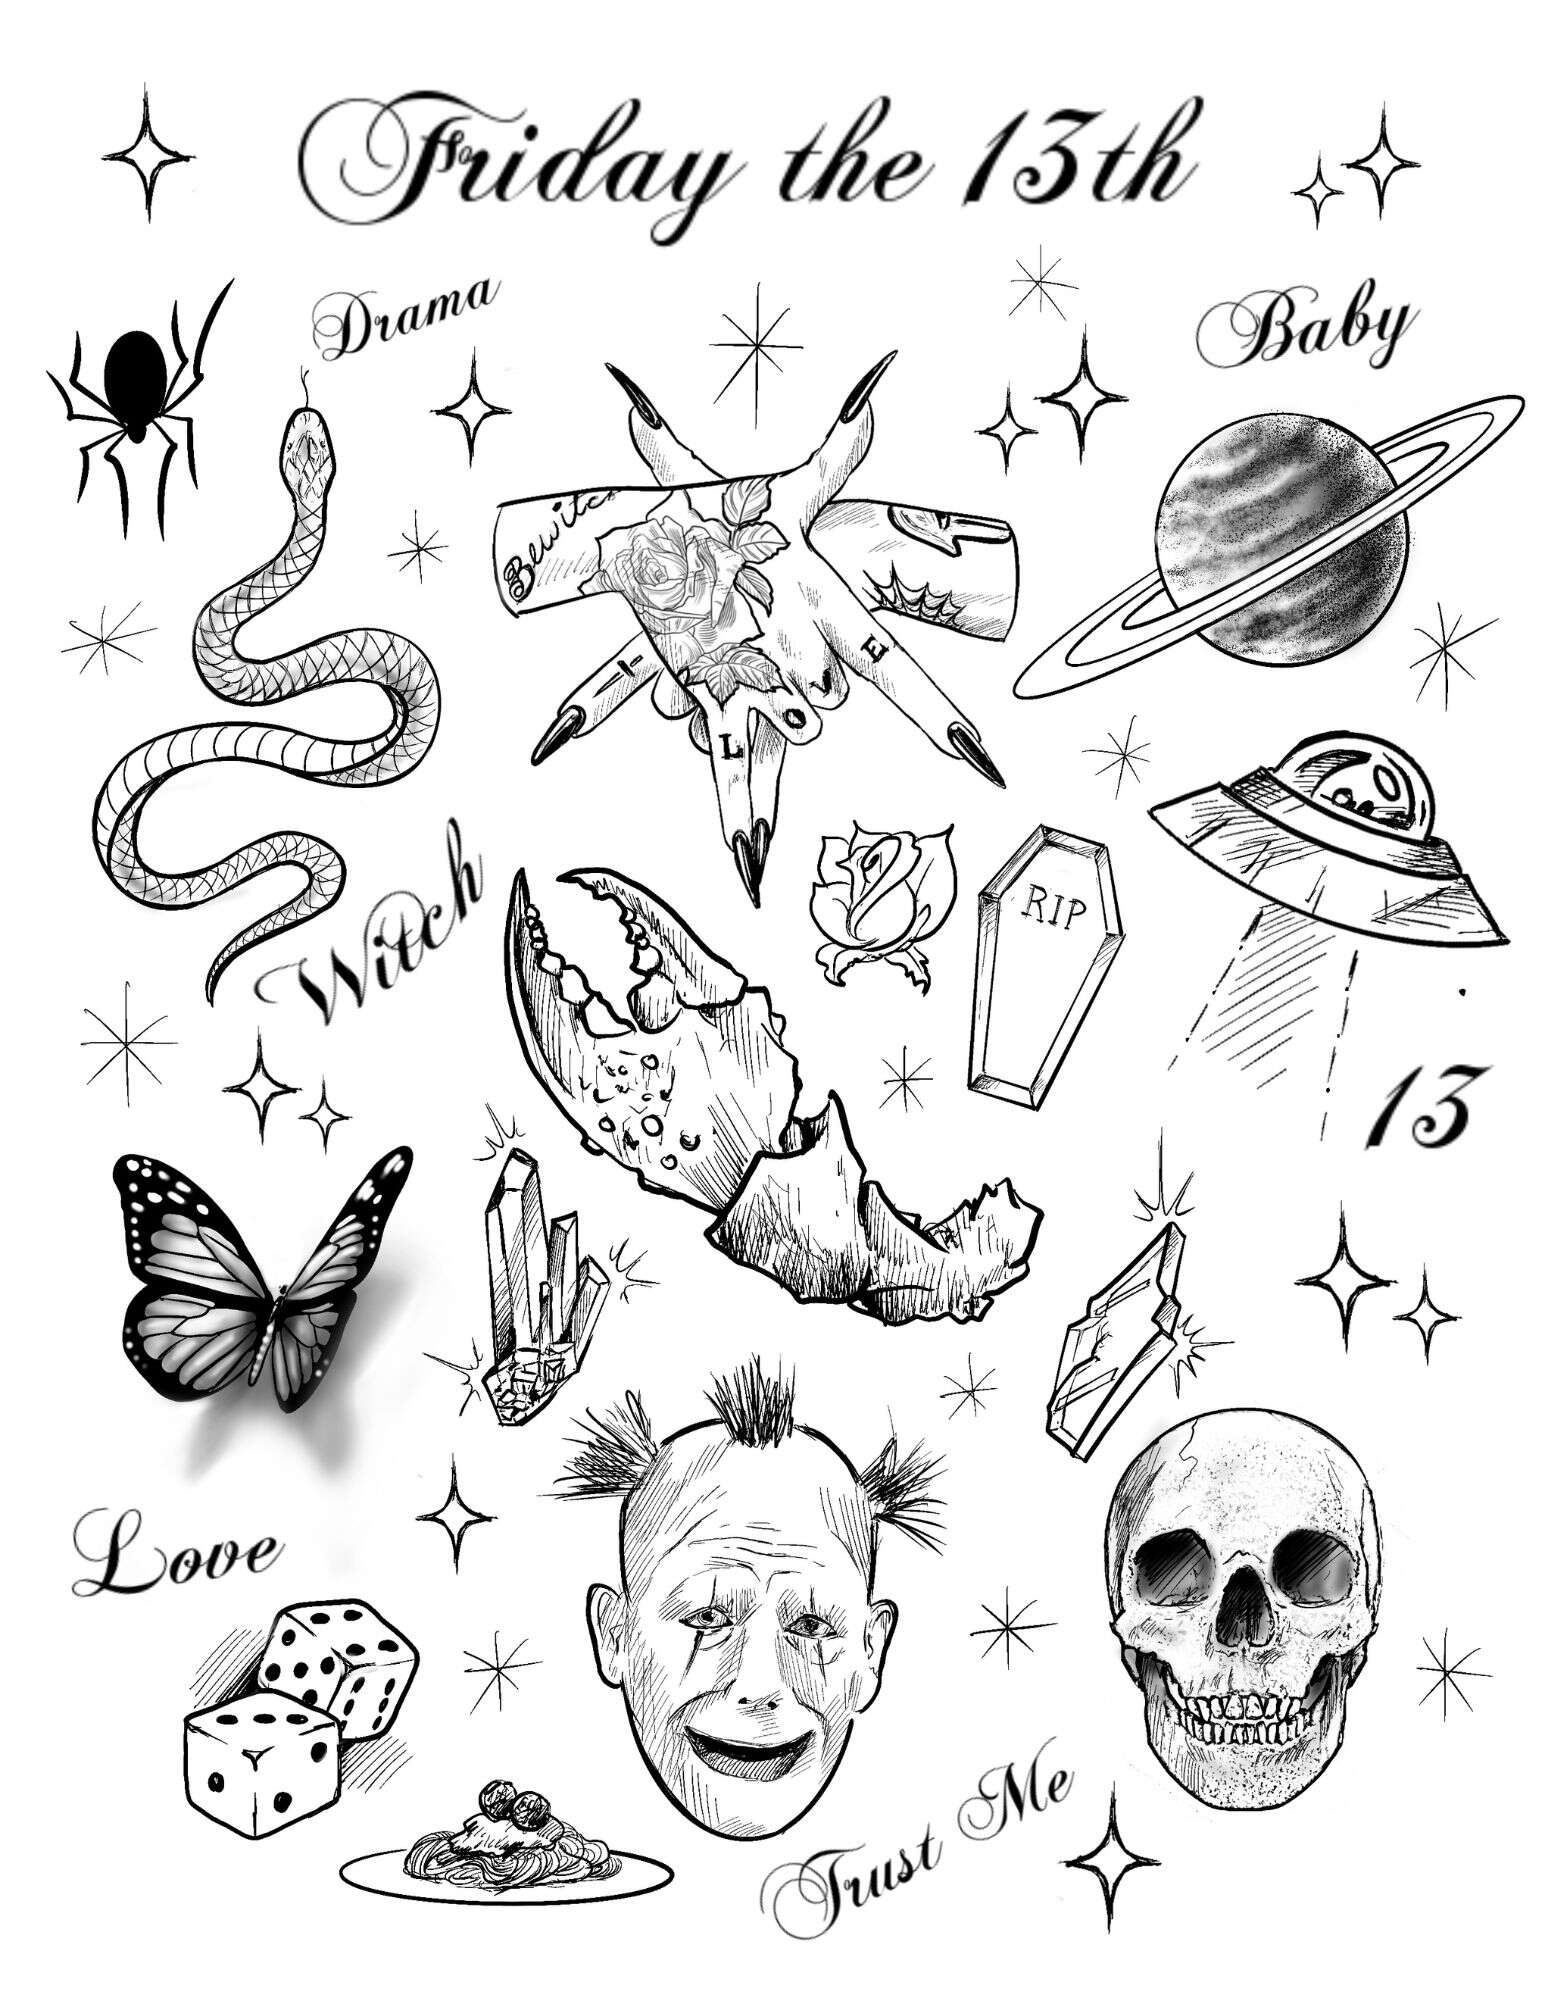 FRiday the 13th tattoos